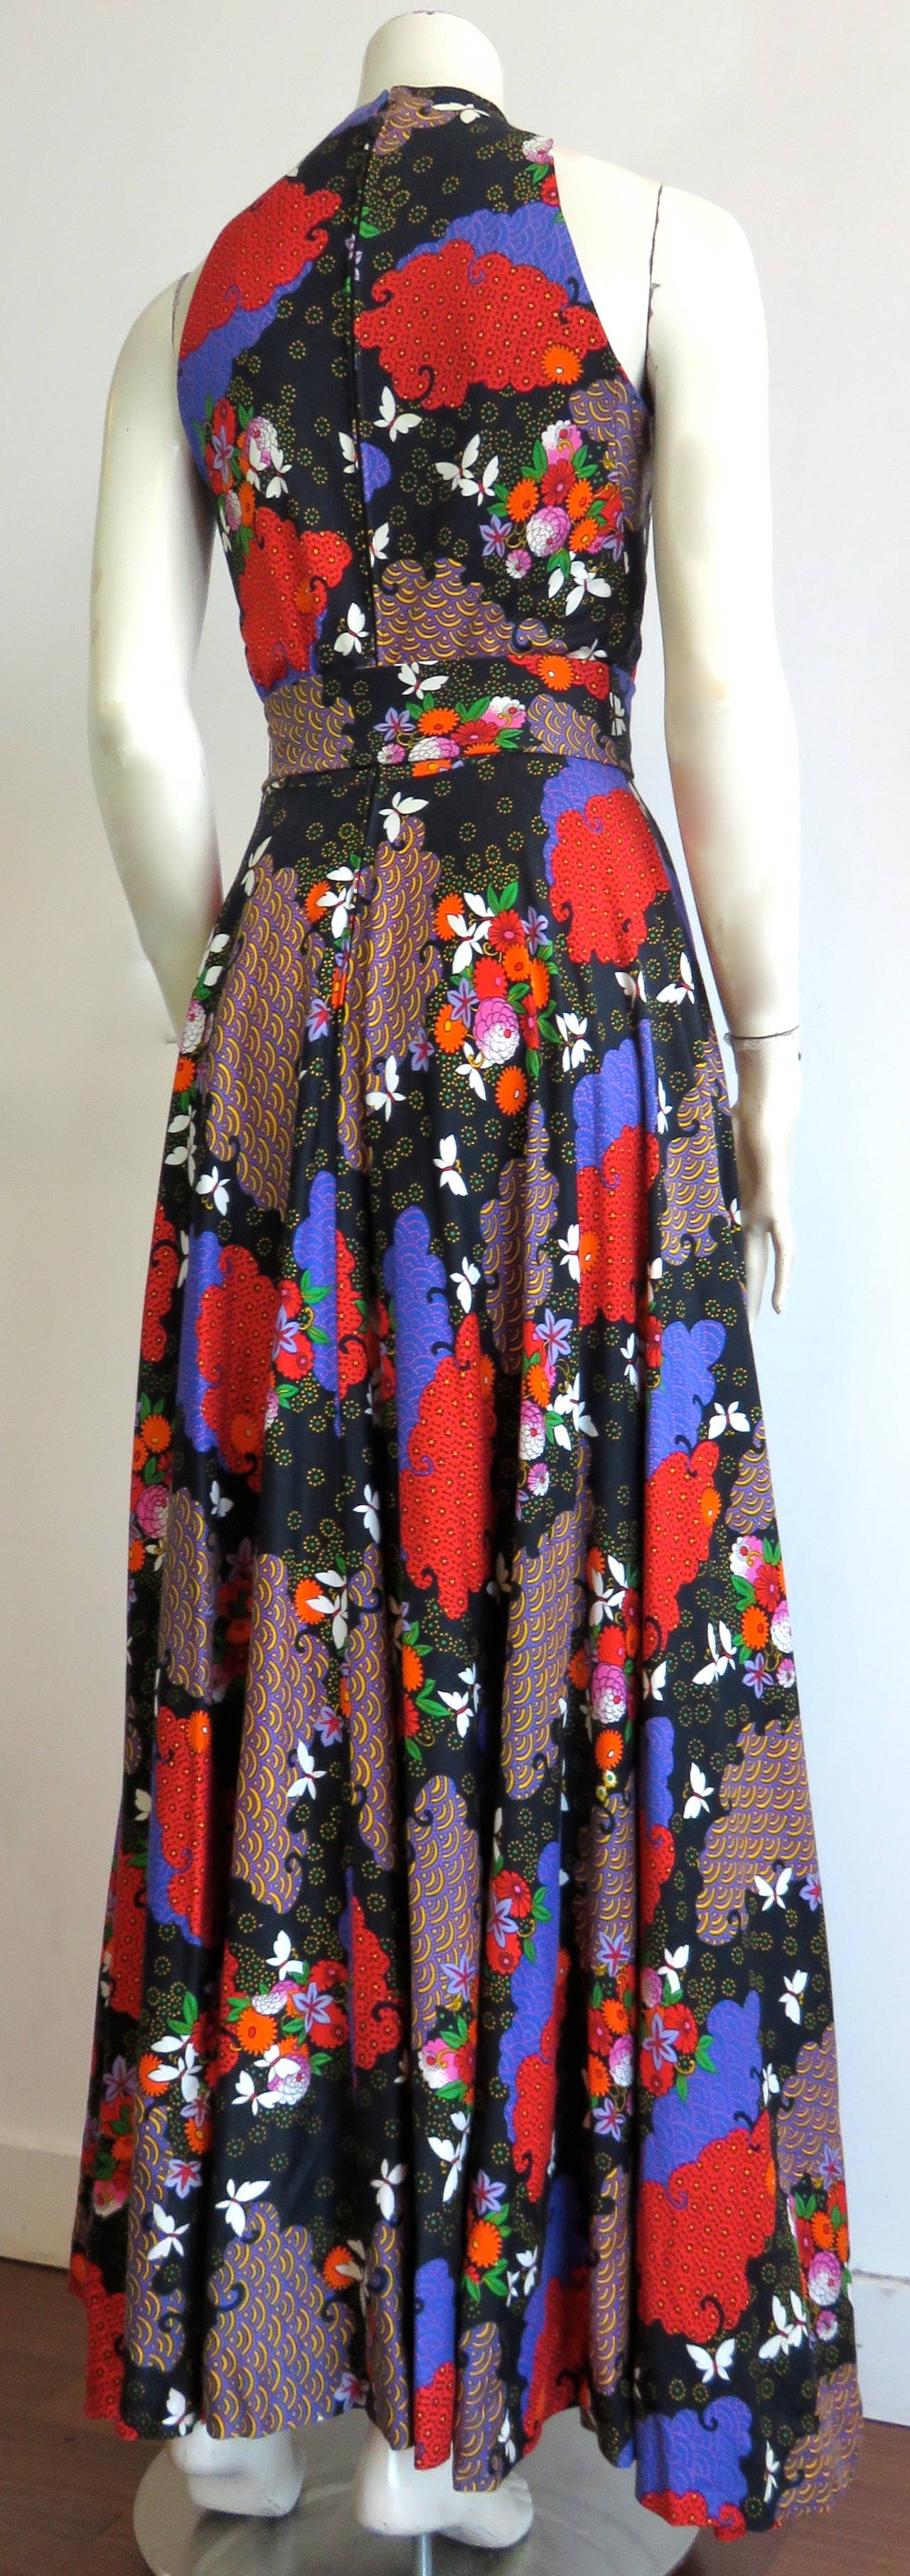 1970's GEOFFREY BEENE BOUTIQUE Floral print dress and belt For Sale at ...